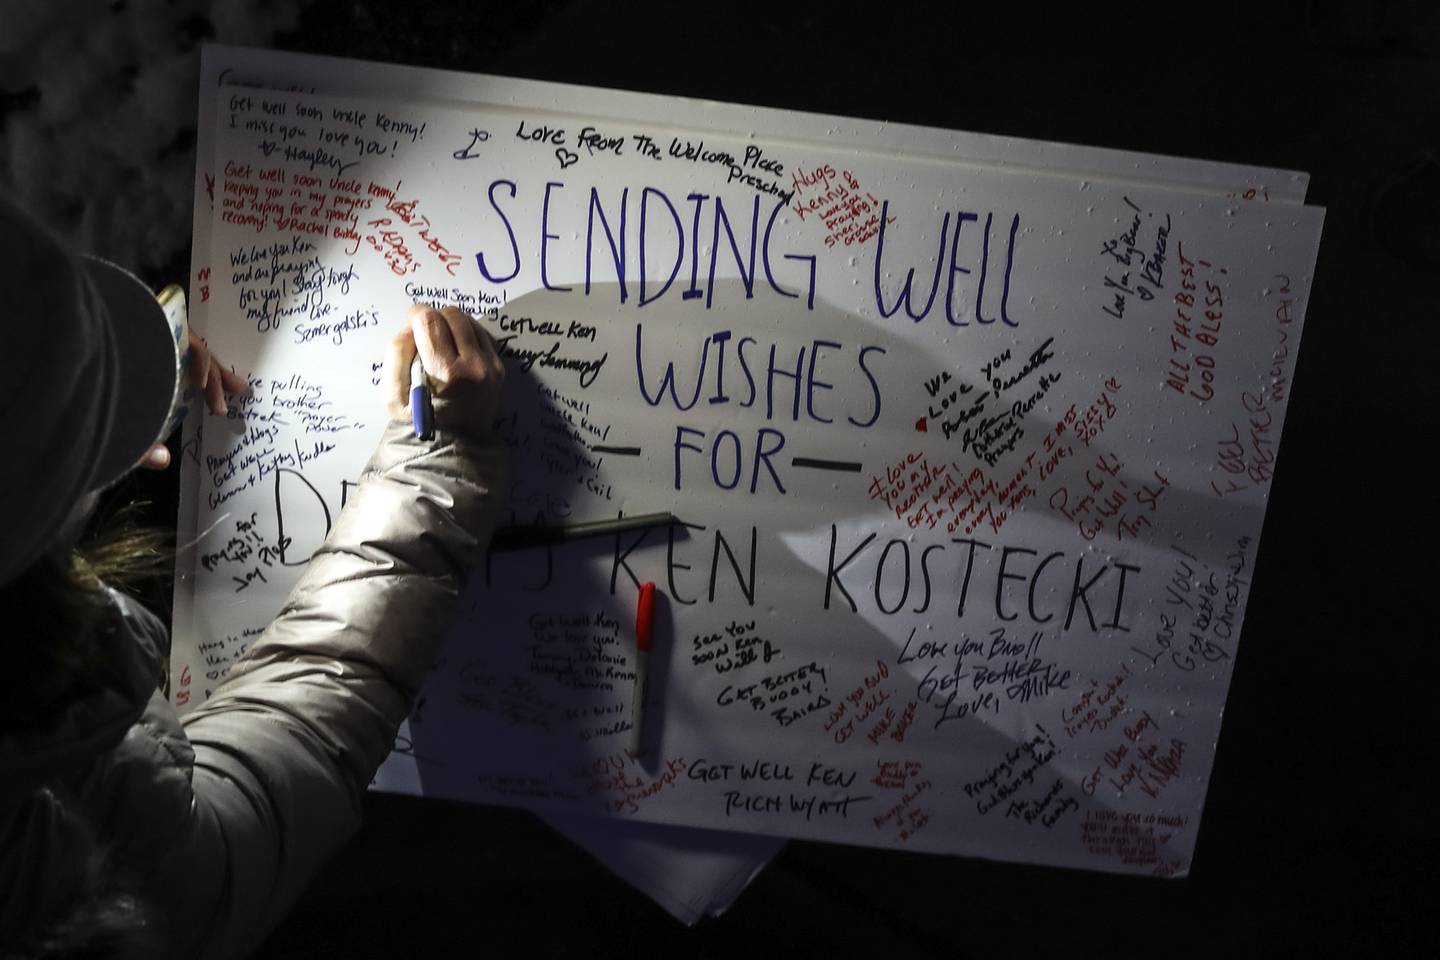 Vigil attendees sign a "get well" card for Deputy Ken Kostecki on Tuesday, Jan. 26, 2021, at Silver Cross Hospital in New Lennox, Ill. Family, friends and coworkers attended a candlelight vigil for Deputy Ken Kostecki of the Will County Sheriffs office who is currently on a ventilator as he battles COVID-19.